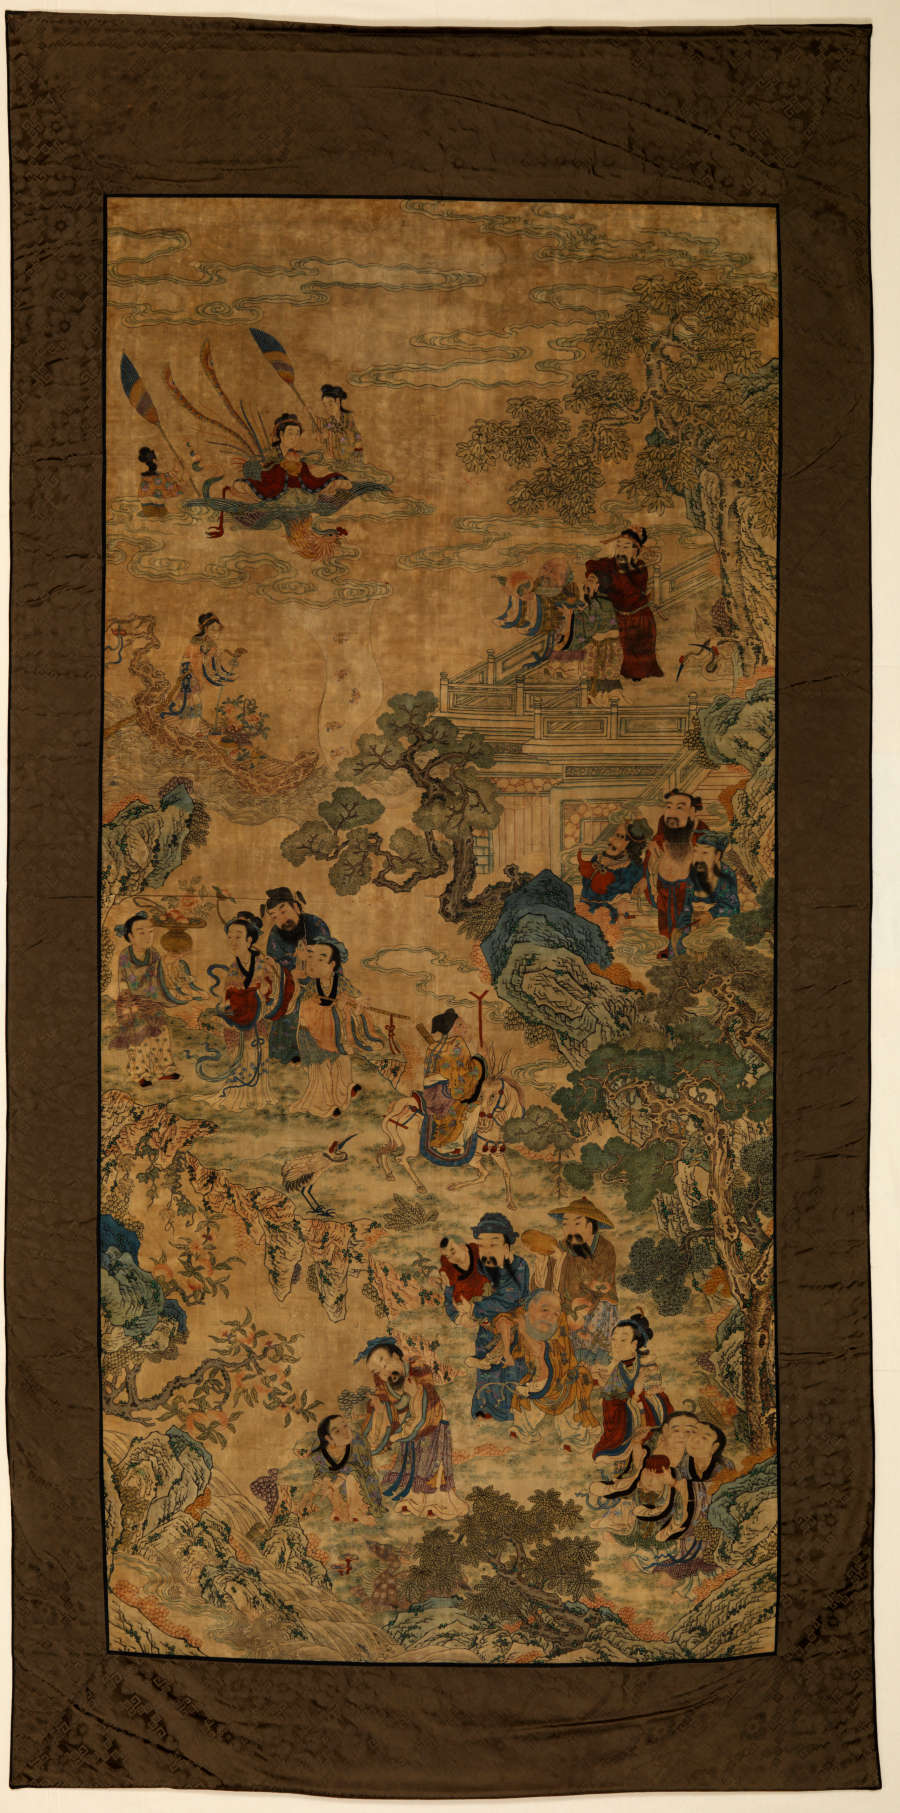 Vertically long rectangular scroll with a thick brown border. It features an illustration of several people engaging with another amongst trees, houses, and in boats on water.